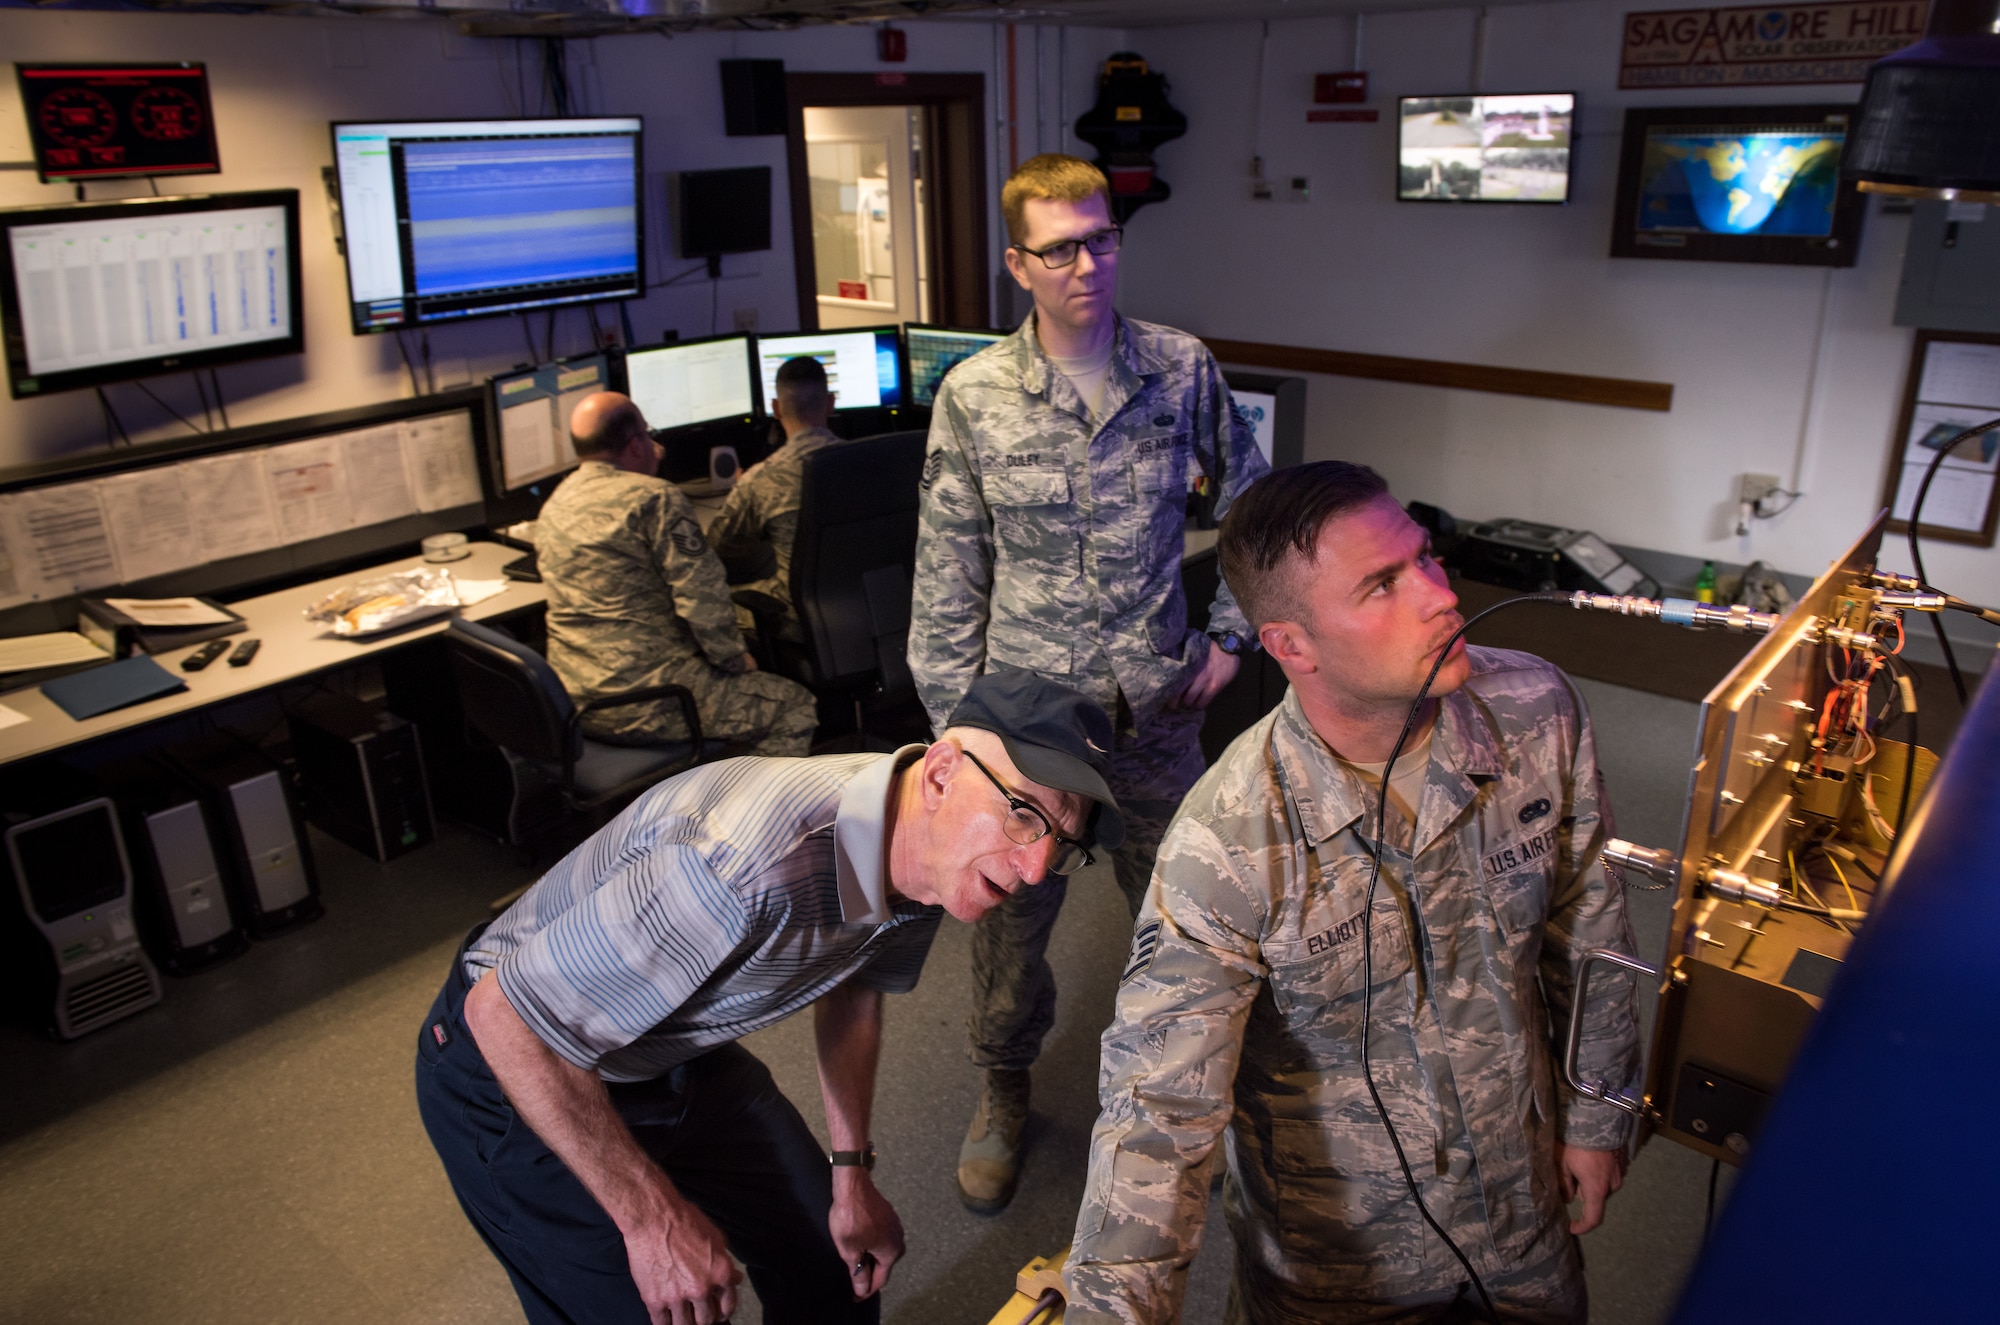 Retired U.S. Air Force Master Sgt. Daniel Holmes, center, tests radio equipment with Staff Sgt. Jake Elliot Radio Interference Telescope technician, right, and Tech. Sgt. Kyle Duley, maintenance NCIOC at the Sagamore Hill Solar Observatory of the 2nd Weather Squadron, Det. 2, in Hamilton, Mass., Jun. 1, 2018. The 2nd WS, headquartered at Offutt Air Force Base, Neb., operates four solar observatories around the globe which enable constant monitoring of the sun for solar phenomenon which may interfere with electronics and communications used by the Department of Defense. (U.S. Air Force photo by J.M. Eddins Jr.)